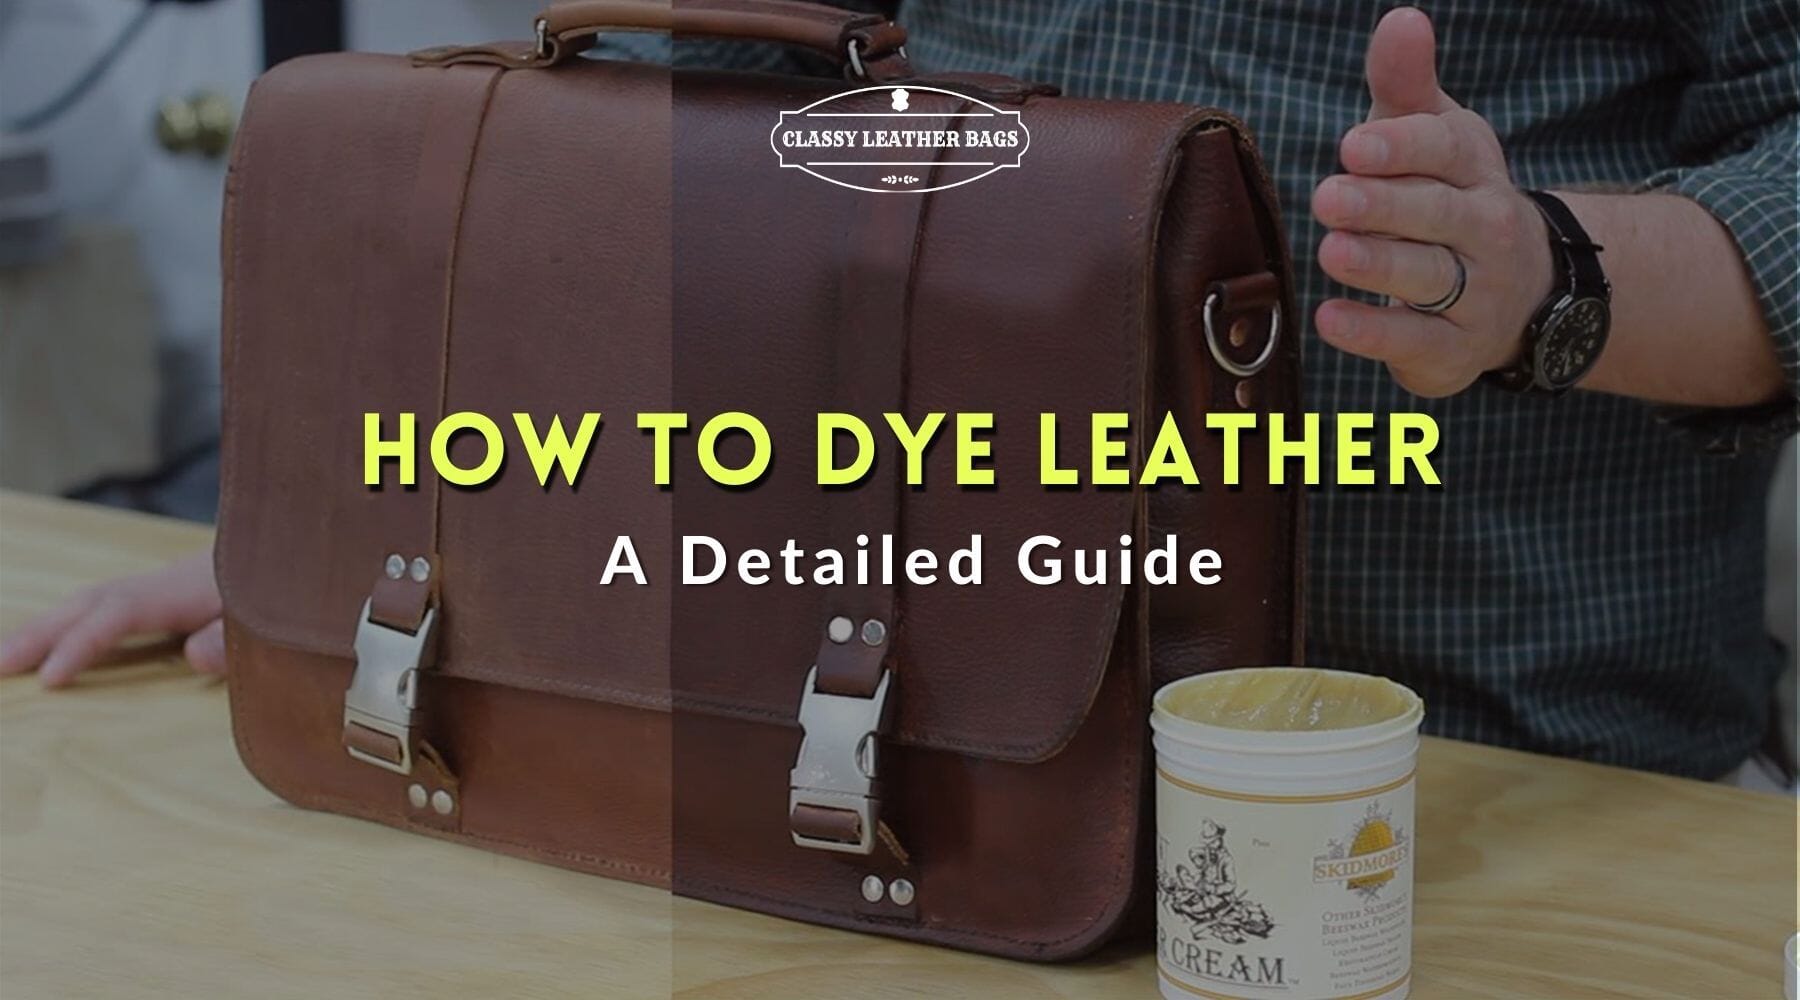 A Detailed Guide on How to Dye Leather